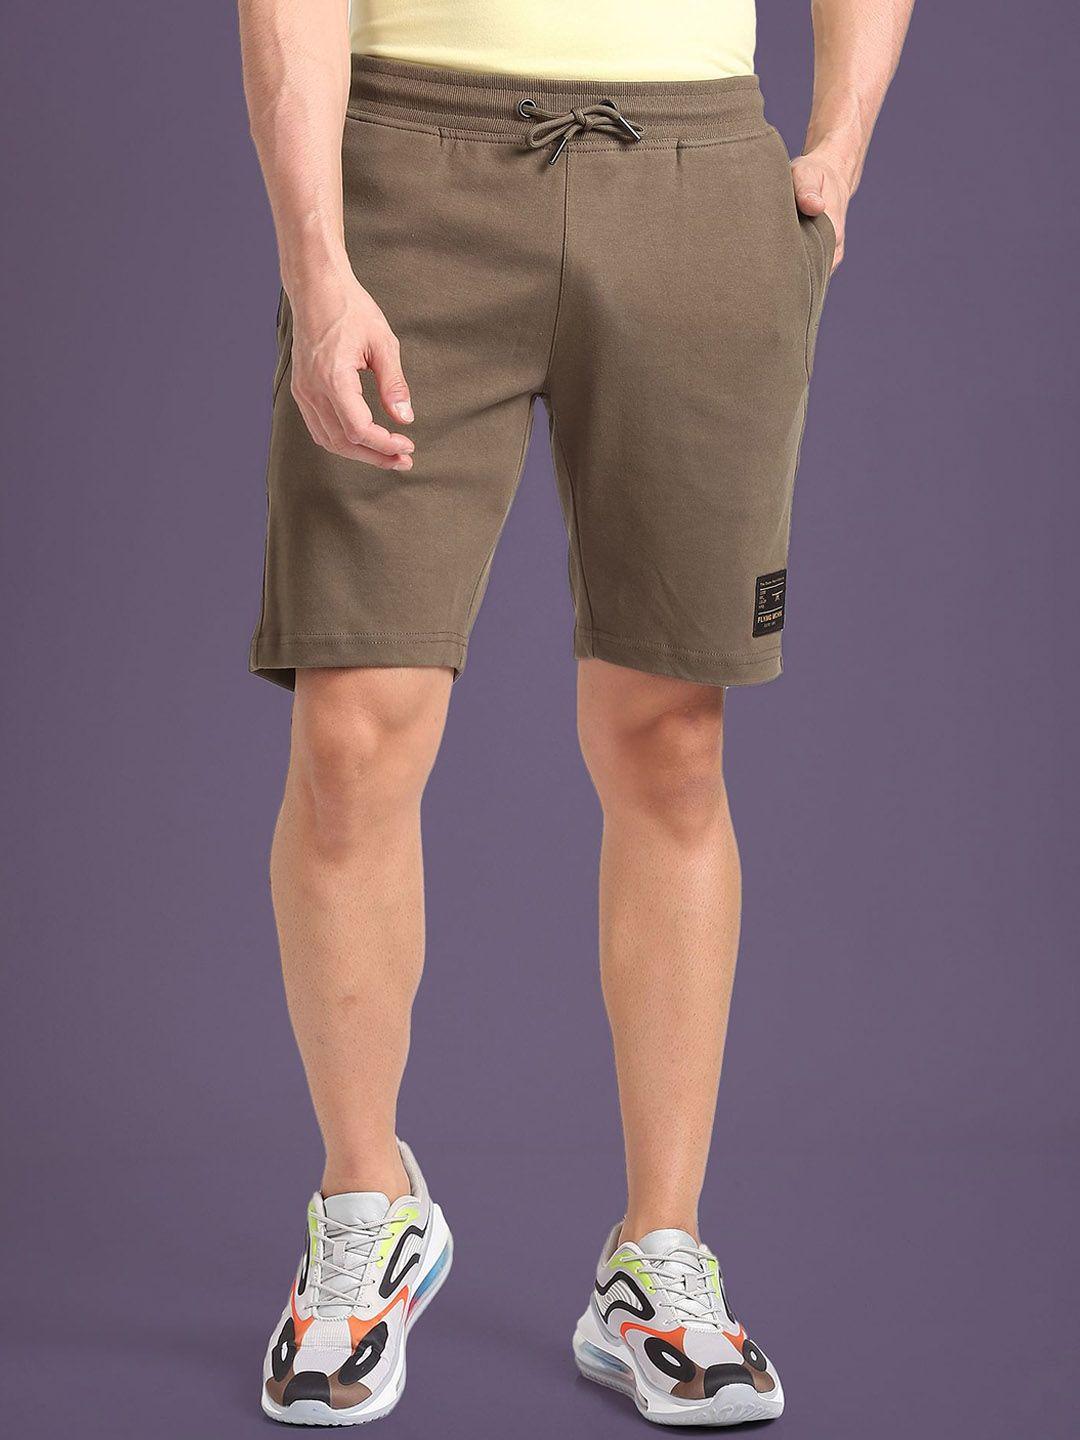 flying-machine-men-mid-rise-casual-cotton-shorts